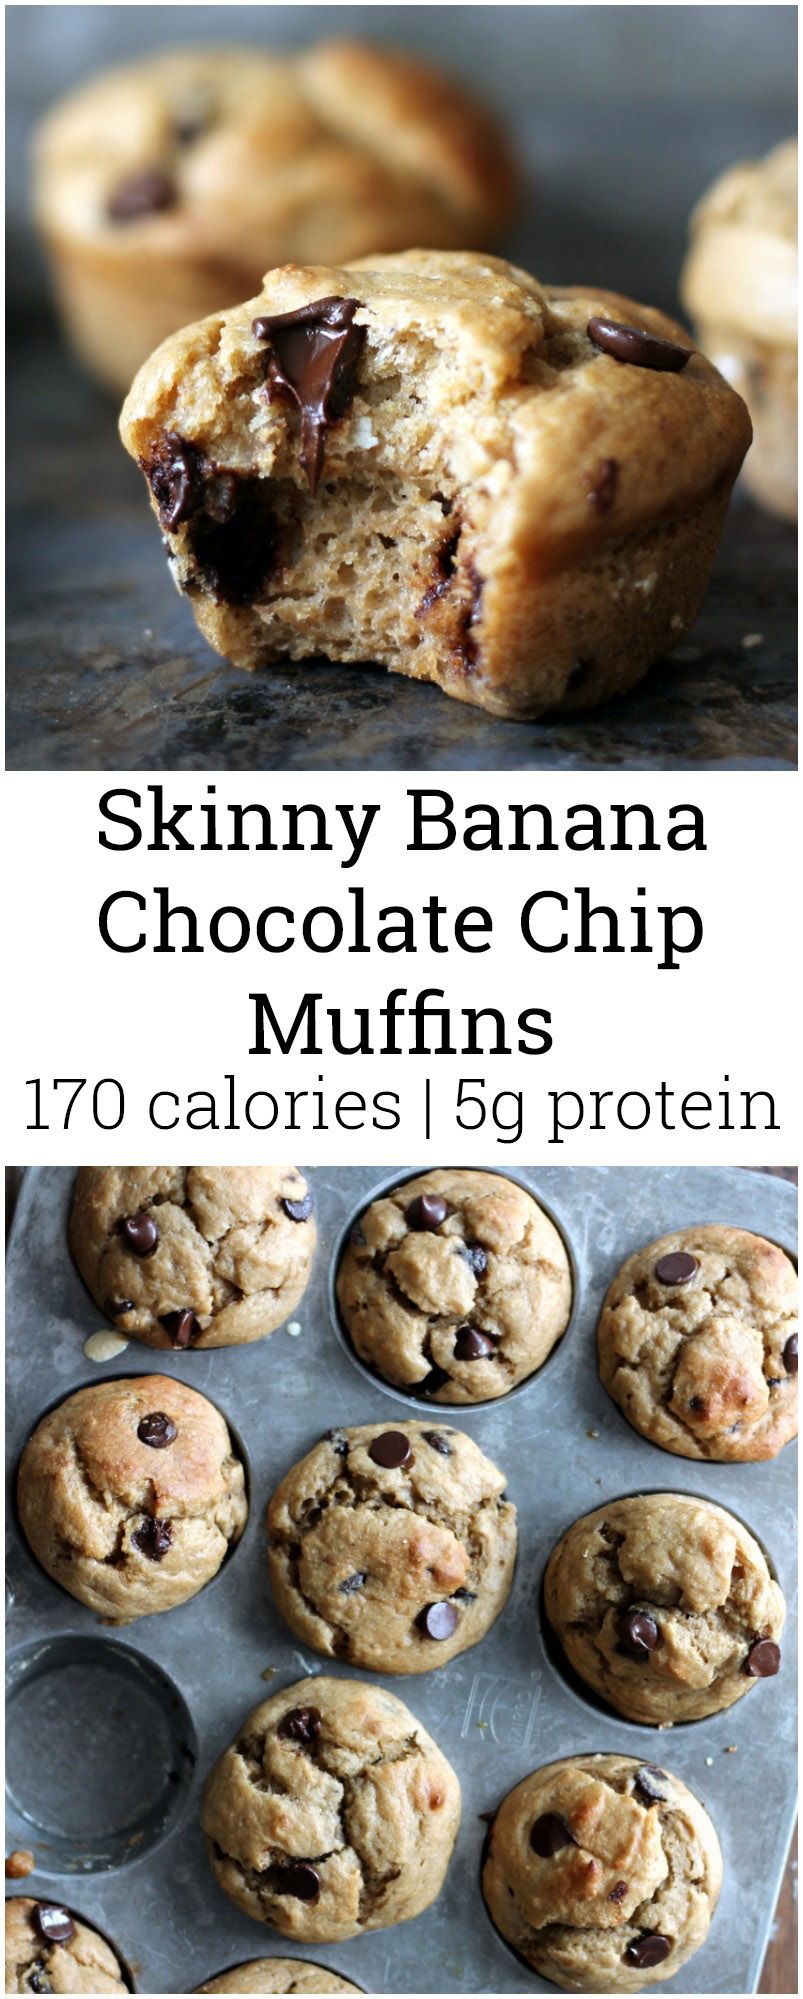 Almost fat free, healthy banana muffins with chocolate chips for a little indulgence. The greek yogurt adds protein and keeps the